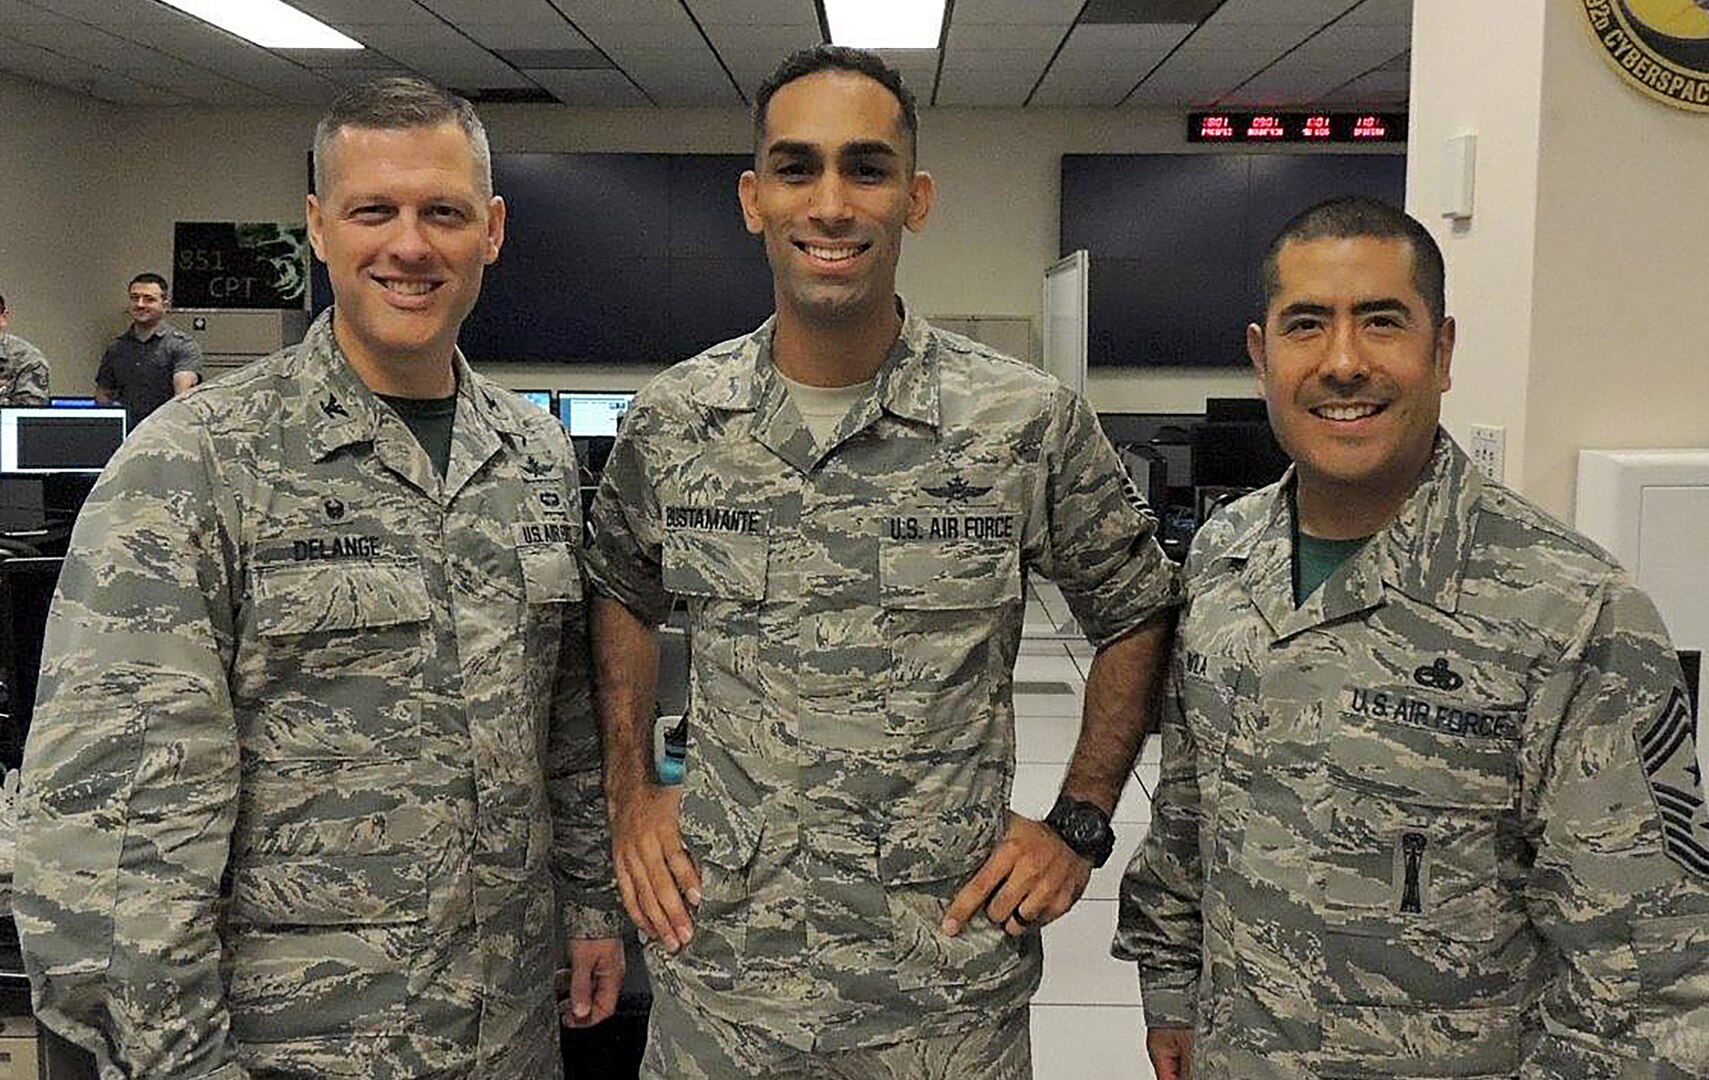 Col. Eric Delange, 688th Cyberspace Wing Commander (left), and Chief Master Sgt. Emilio Avila, 688th CW command chief (right), congratulate Master Sgt. Anthony Bustamante, 92nd Cyberspace Operations Squadron flight chief, on being selected as one of the first Airmen to undergo direct appointment into the Air Force cyberspace officer corps. Direct appointment for cyberspace officers was authorized under the 2017 National Defense Authorization Act. The candidates’ experience will be used to develop policies and procedures for future applicants. (Courtesy photo)